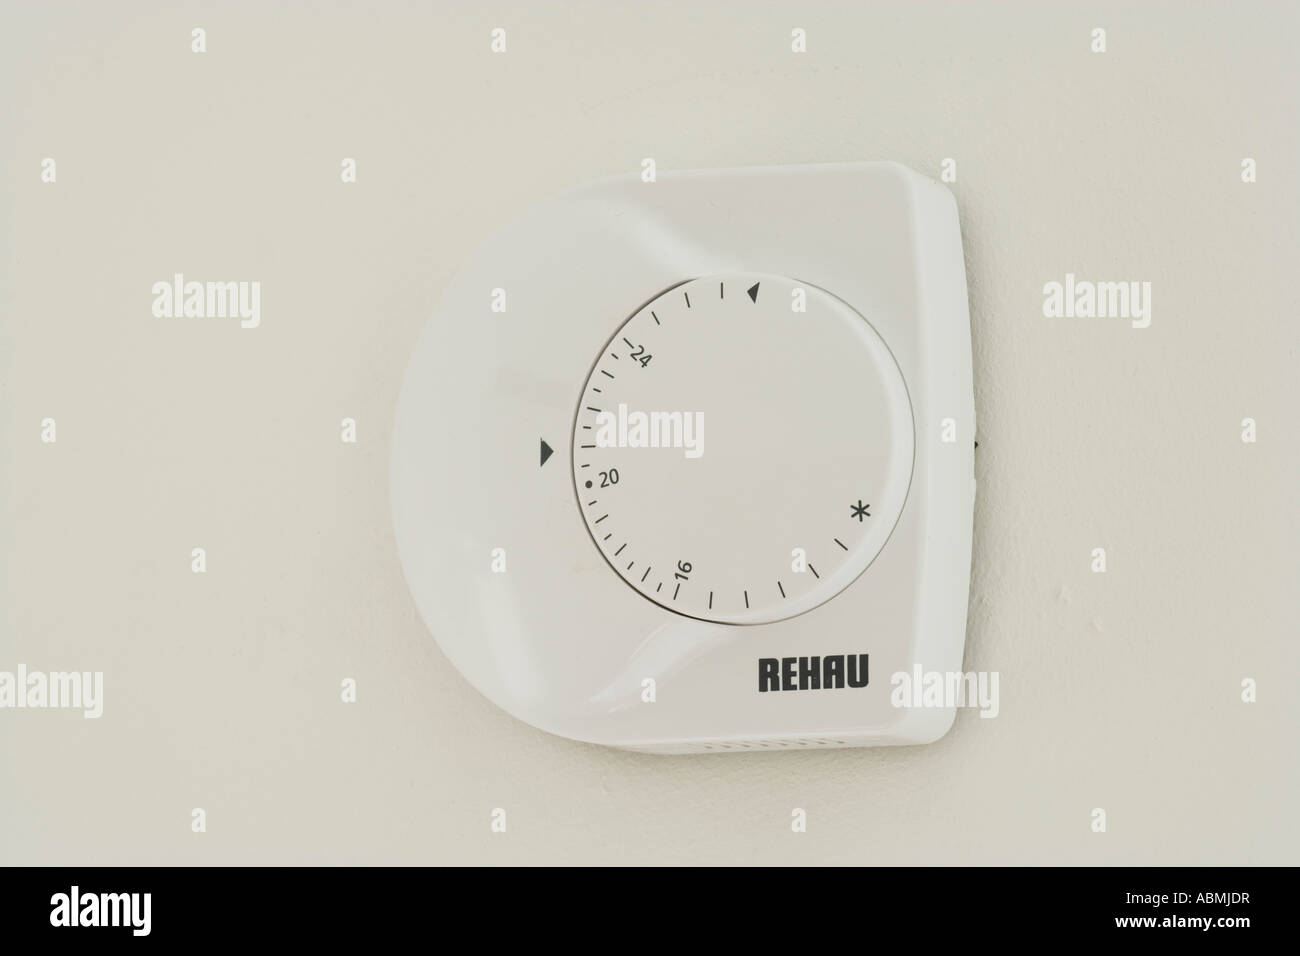 heating temperature control dial Stock Photo - Alamy